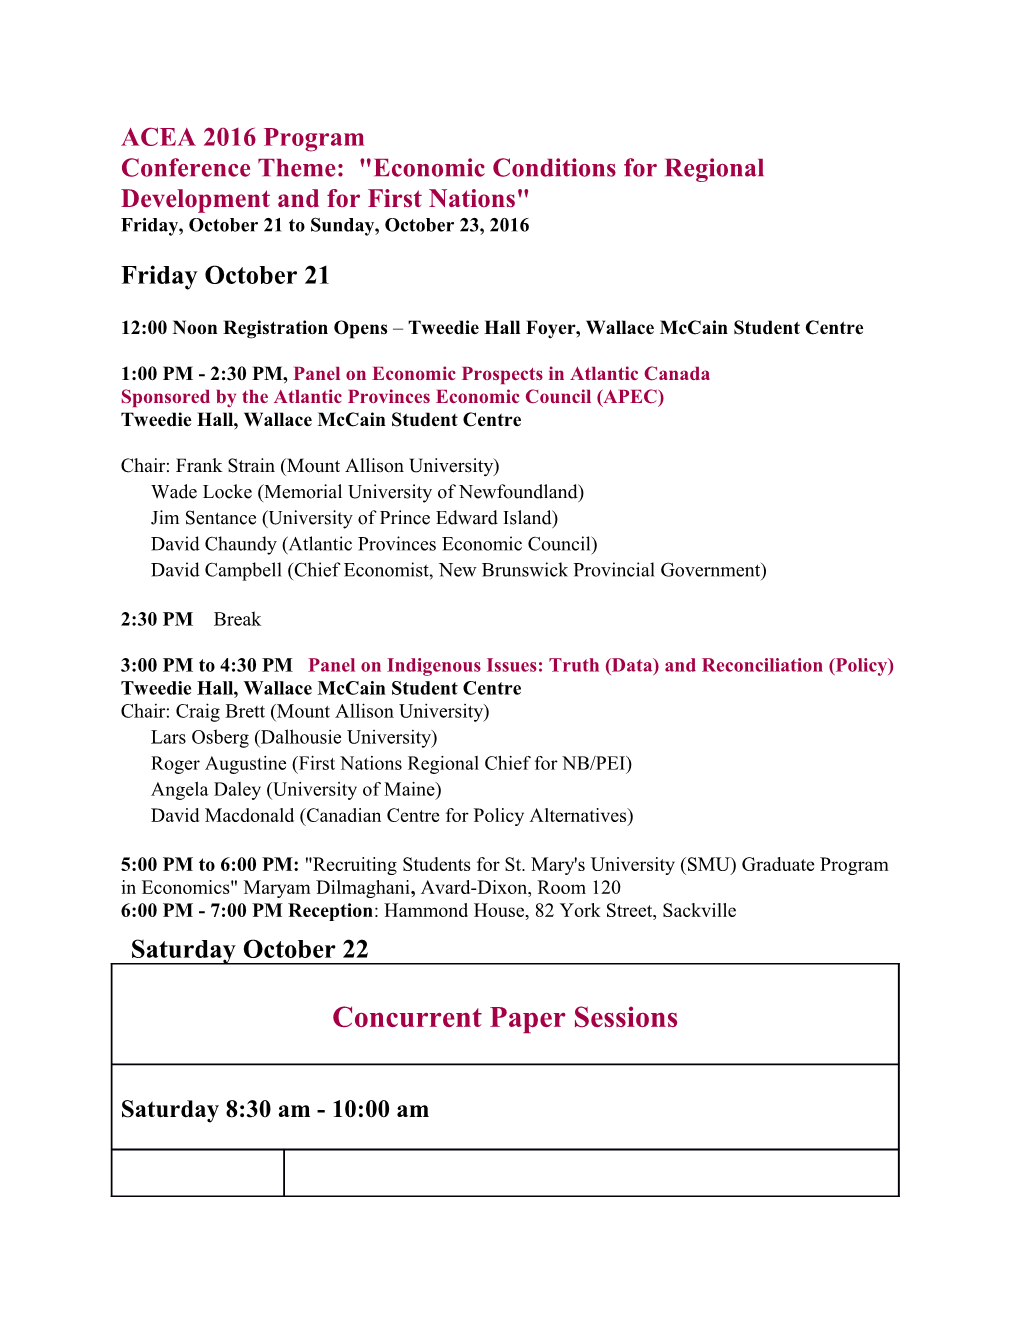 Conference Theme: Economic Conditions for Regional Development and for First Nations